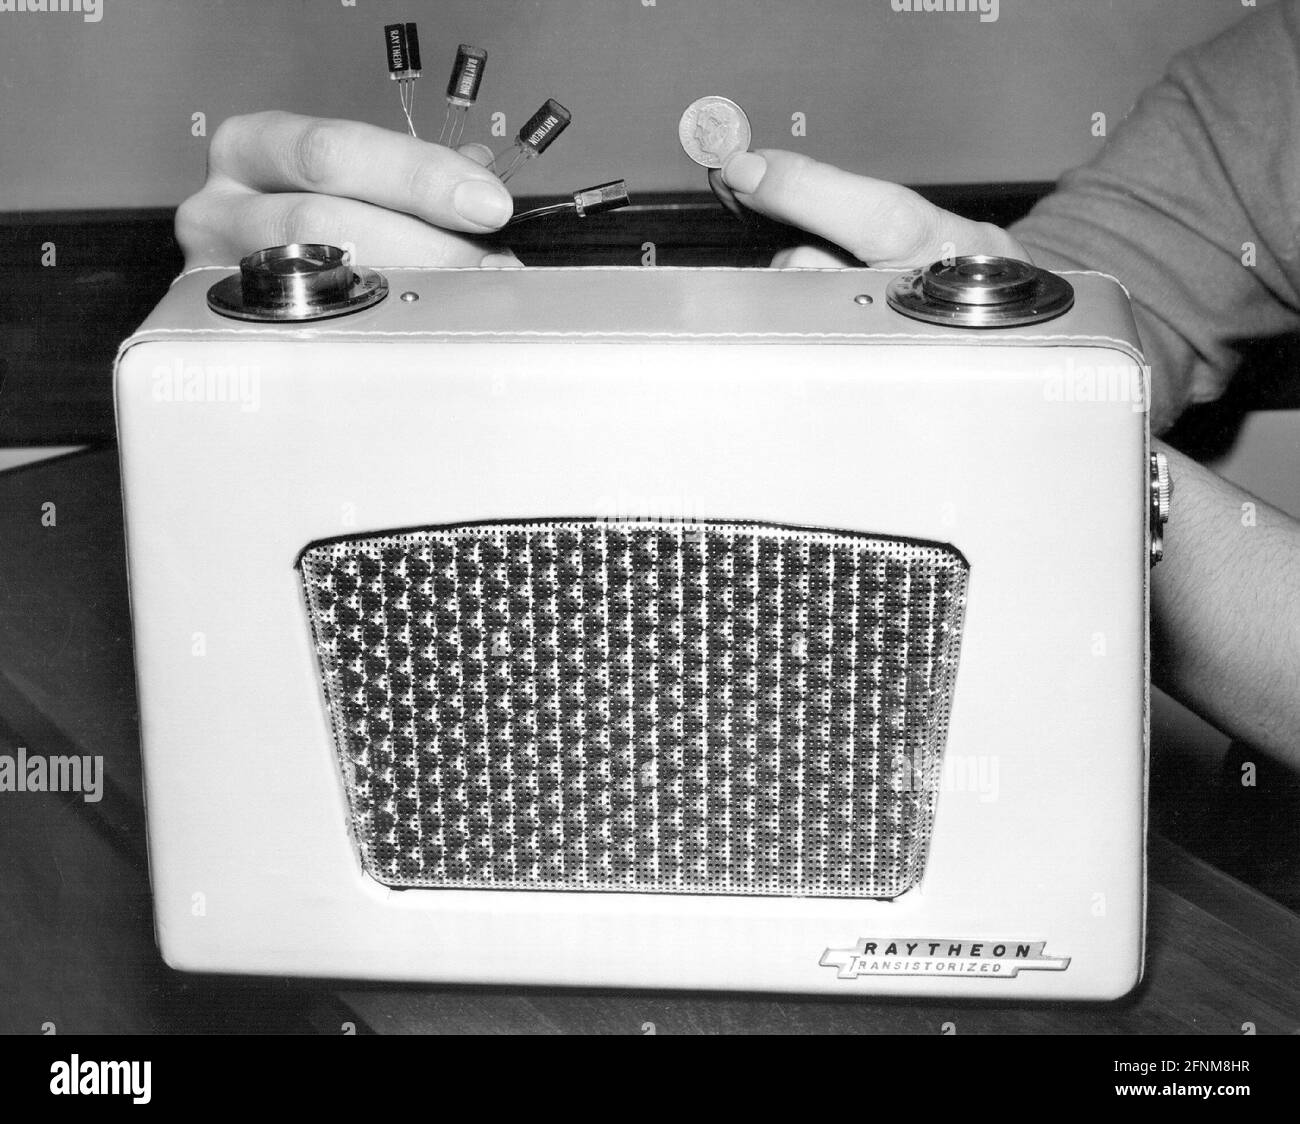 broadcast, radio, Raytheon radio set, 1960s, ADDITIONAL-RIGHTS-CLEARANCE-INFO-NOT-AVAILABLE Stock Photo